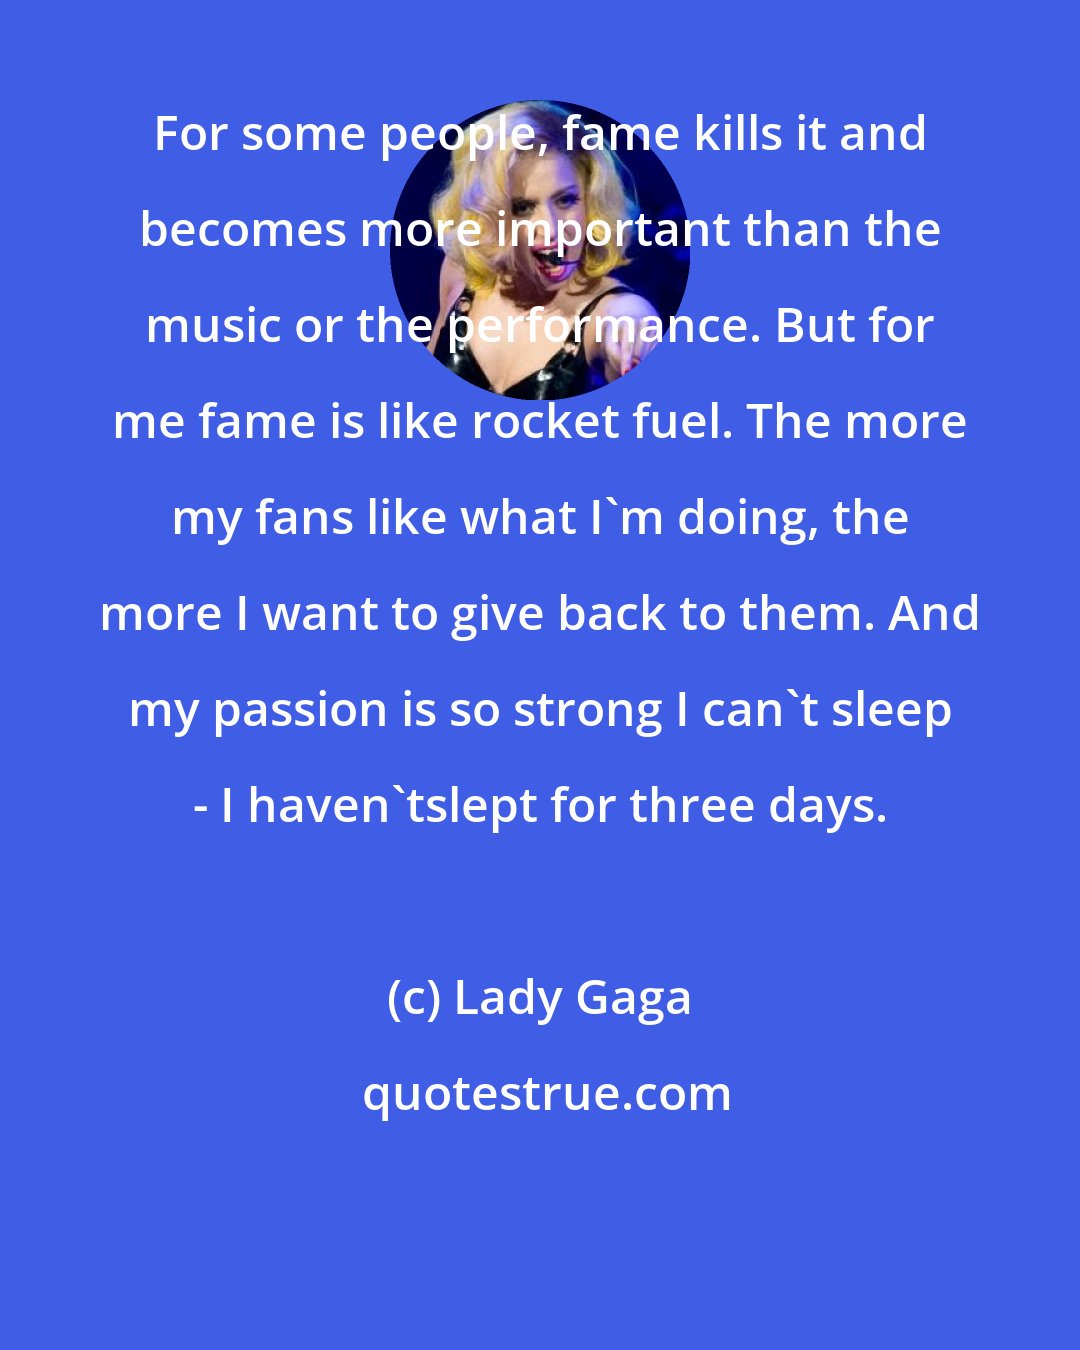 Lady Gaga: For some people, fame kills it and becomes more important than the music or the performance. But for me fame is like rocket fuel. The more my fans like what I'm doing, the more I want to give back to them. And my passion is so strong I can't sleep - I haven'tslept for three days.